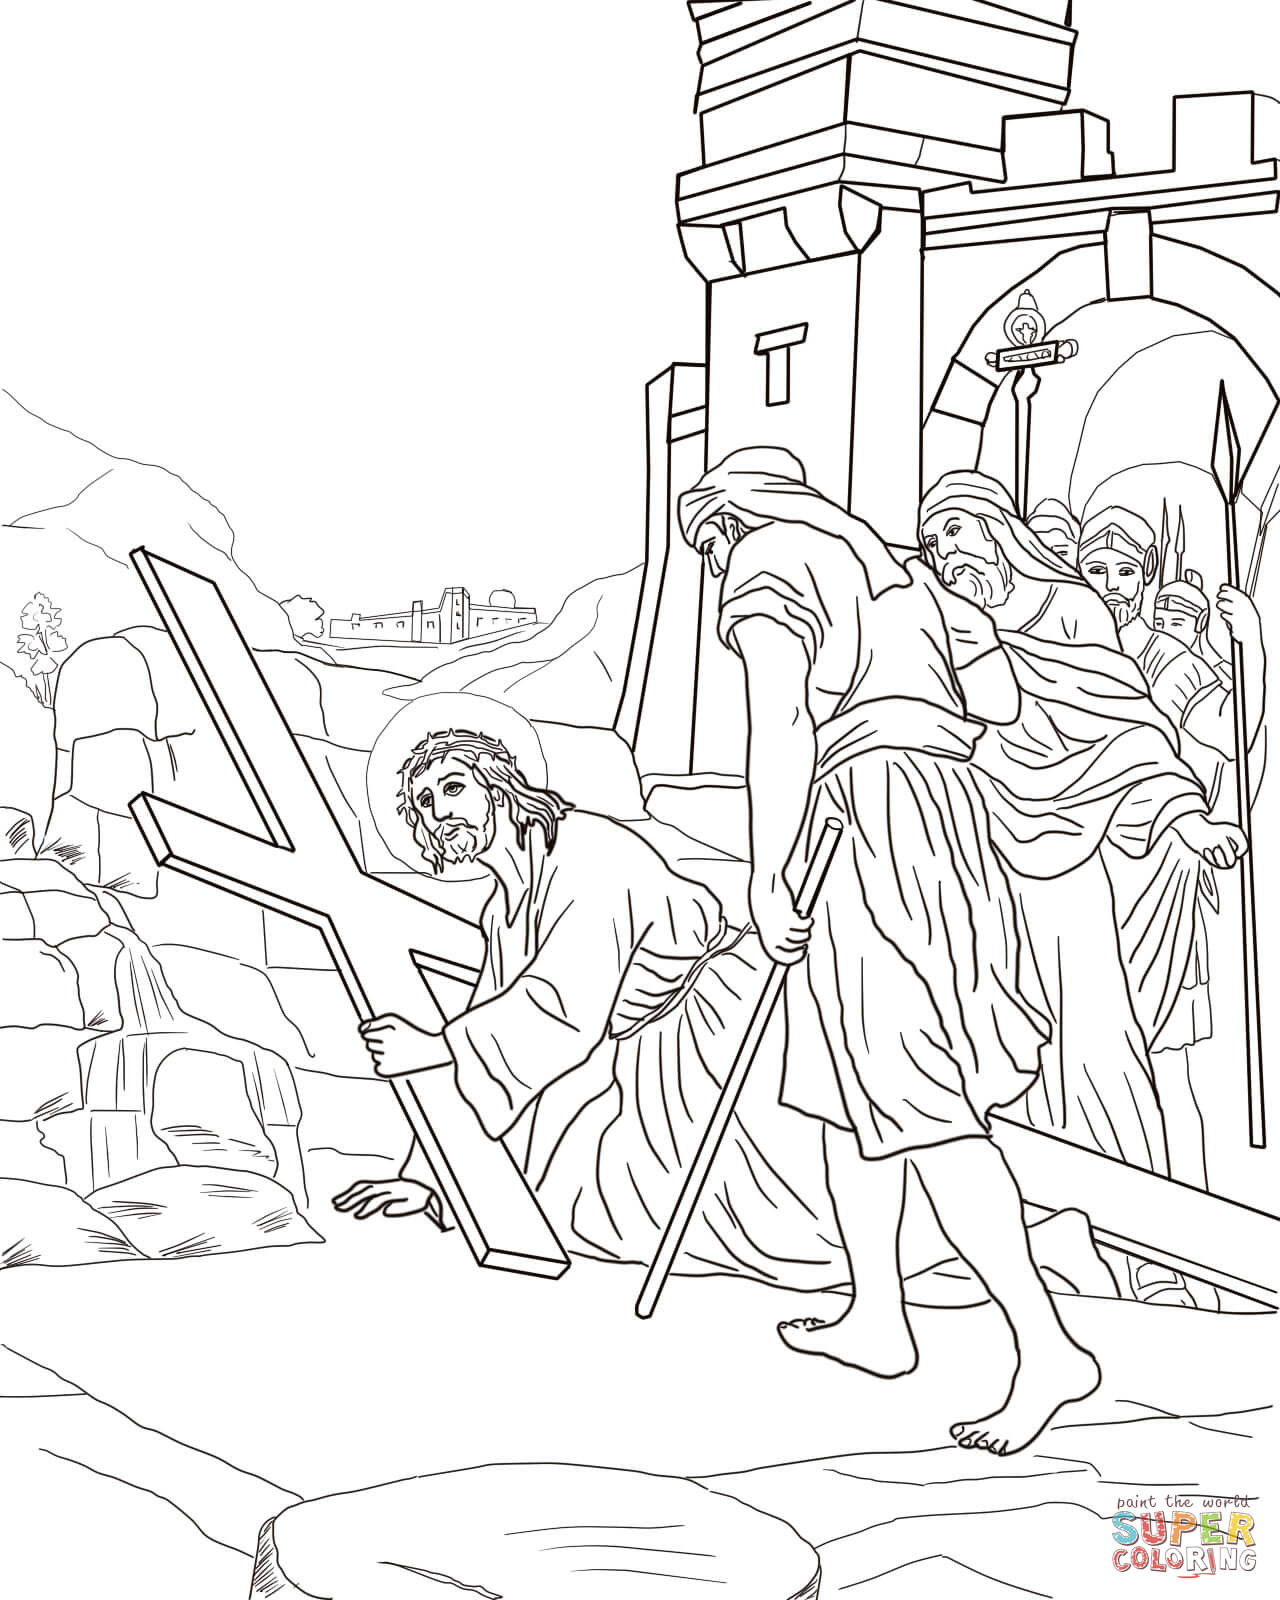 Jesus Stations of the Cross coloring pages | Free Coloring Pages